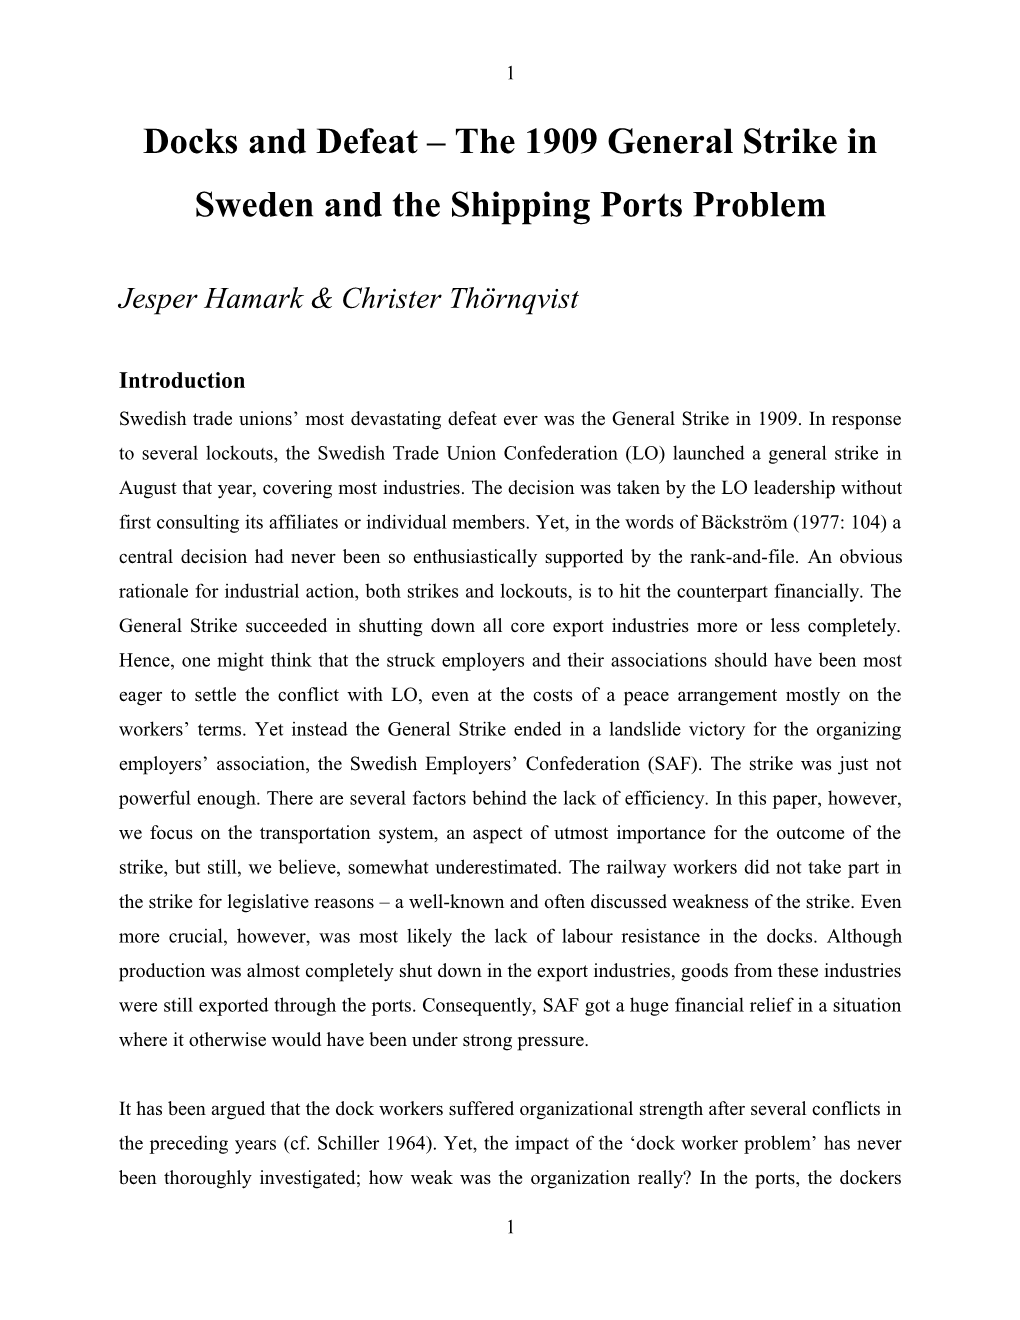 Dockers and Defeat the 1909 General Strike in Sweden and the Shipping Ports Problem